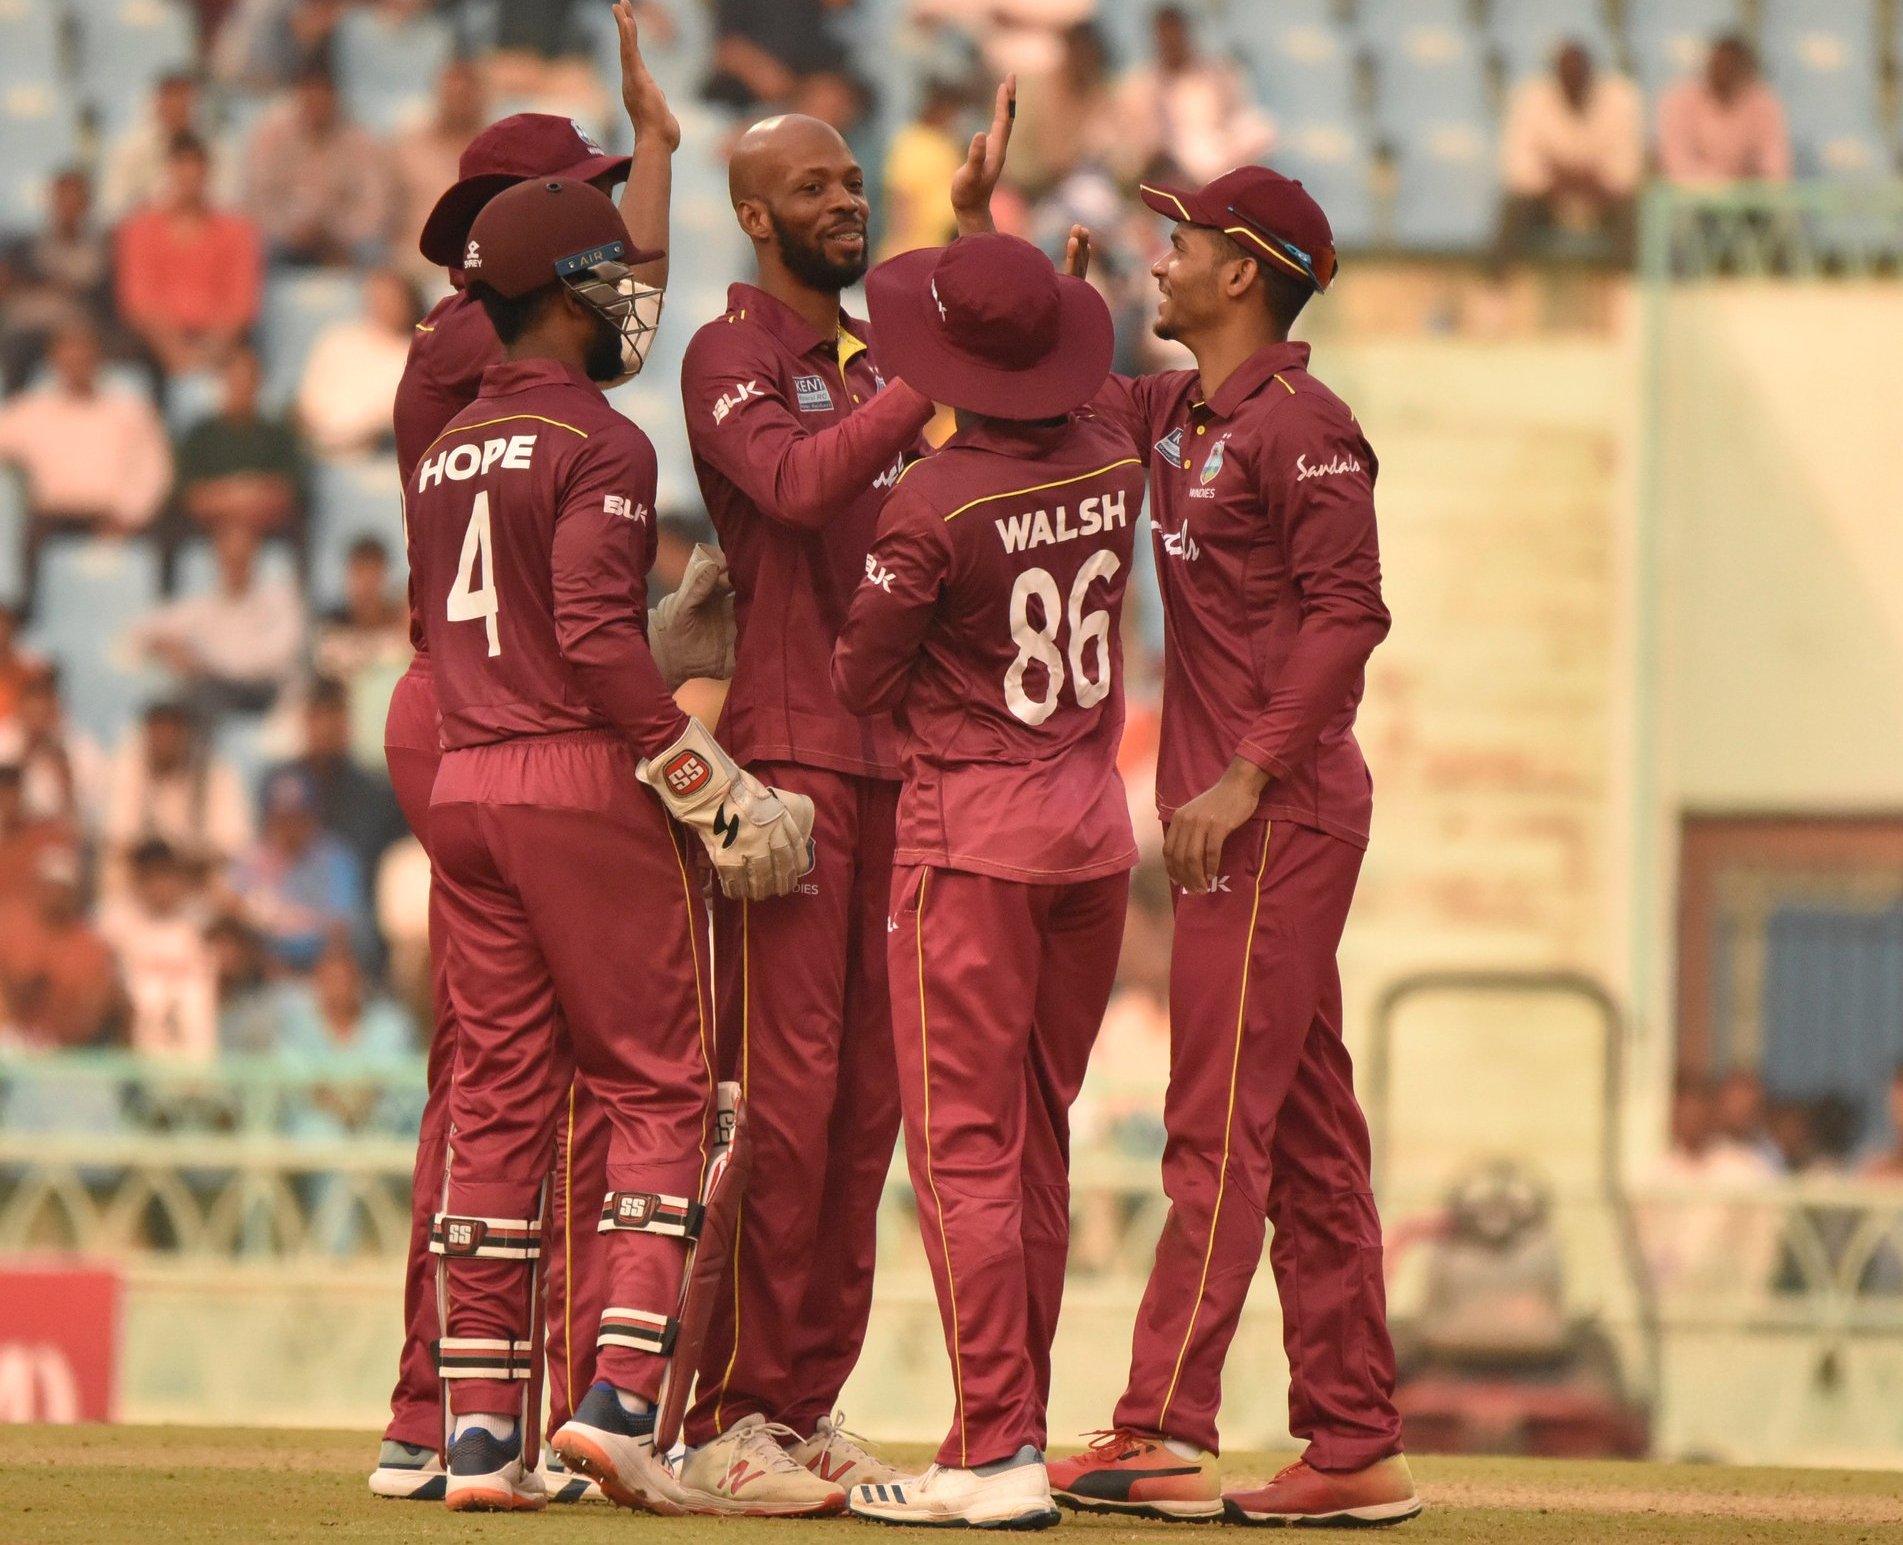 The Calypso Kings registered their first ODI series win since 2014 (Source: Twitter/WindiesCricket)